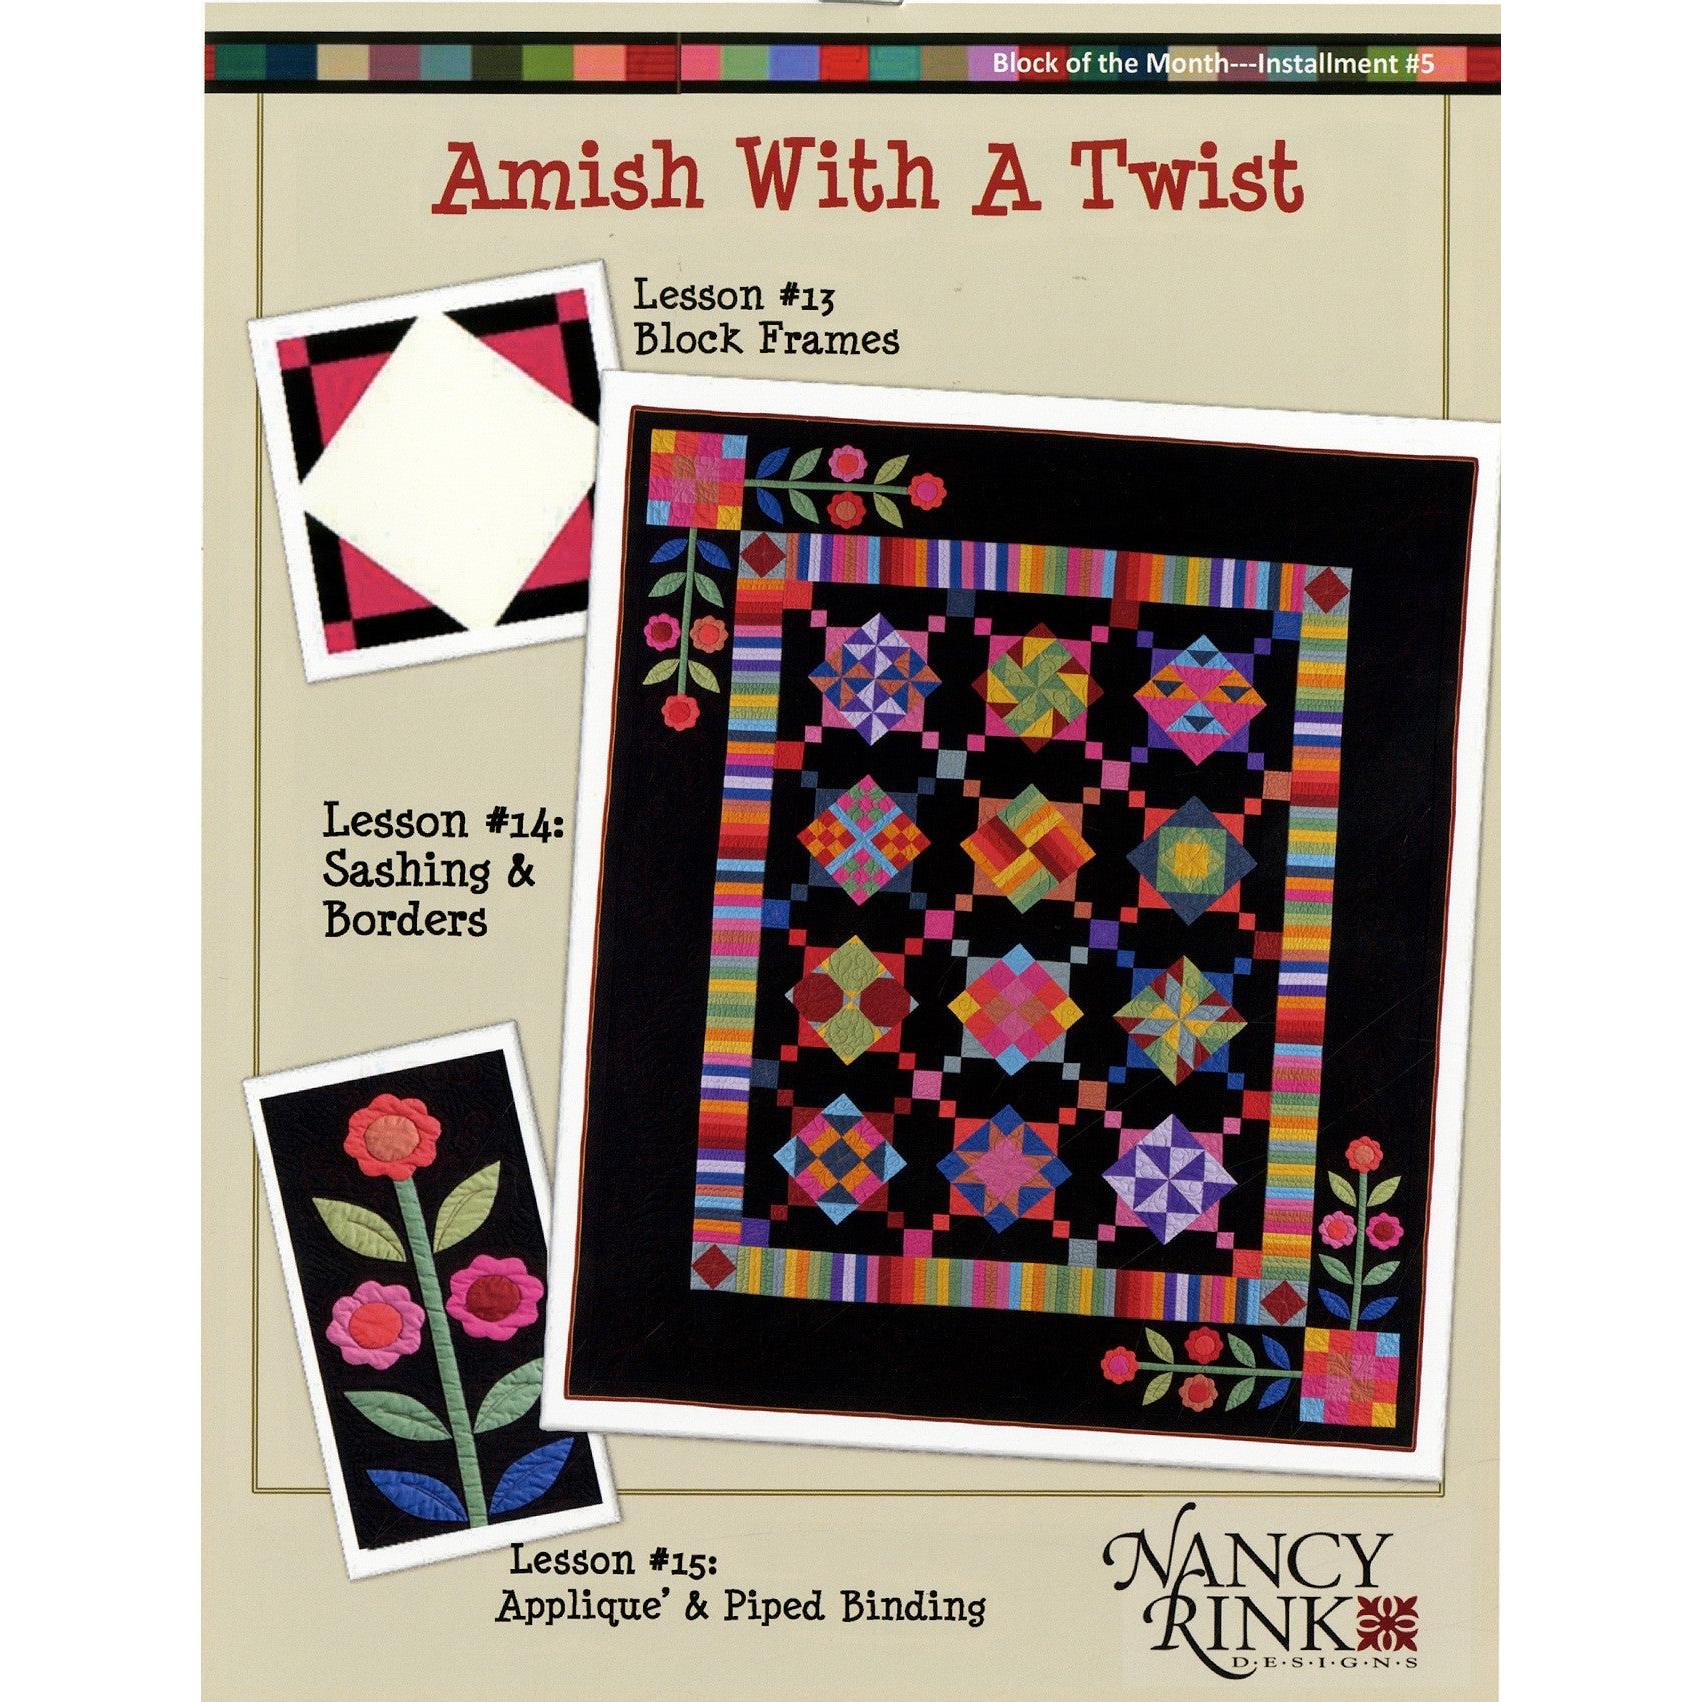 Amish With A Twist Block of the Month